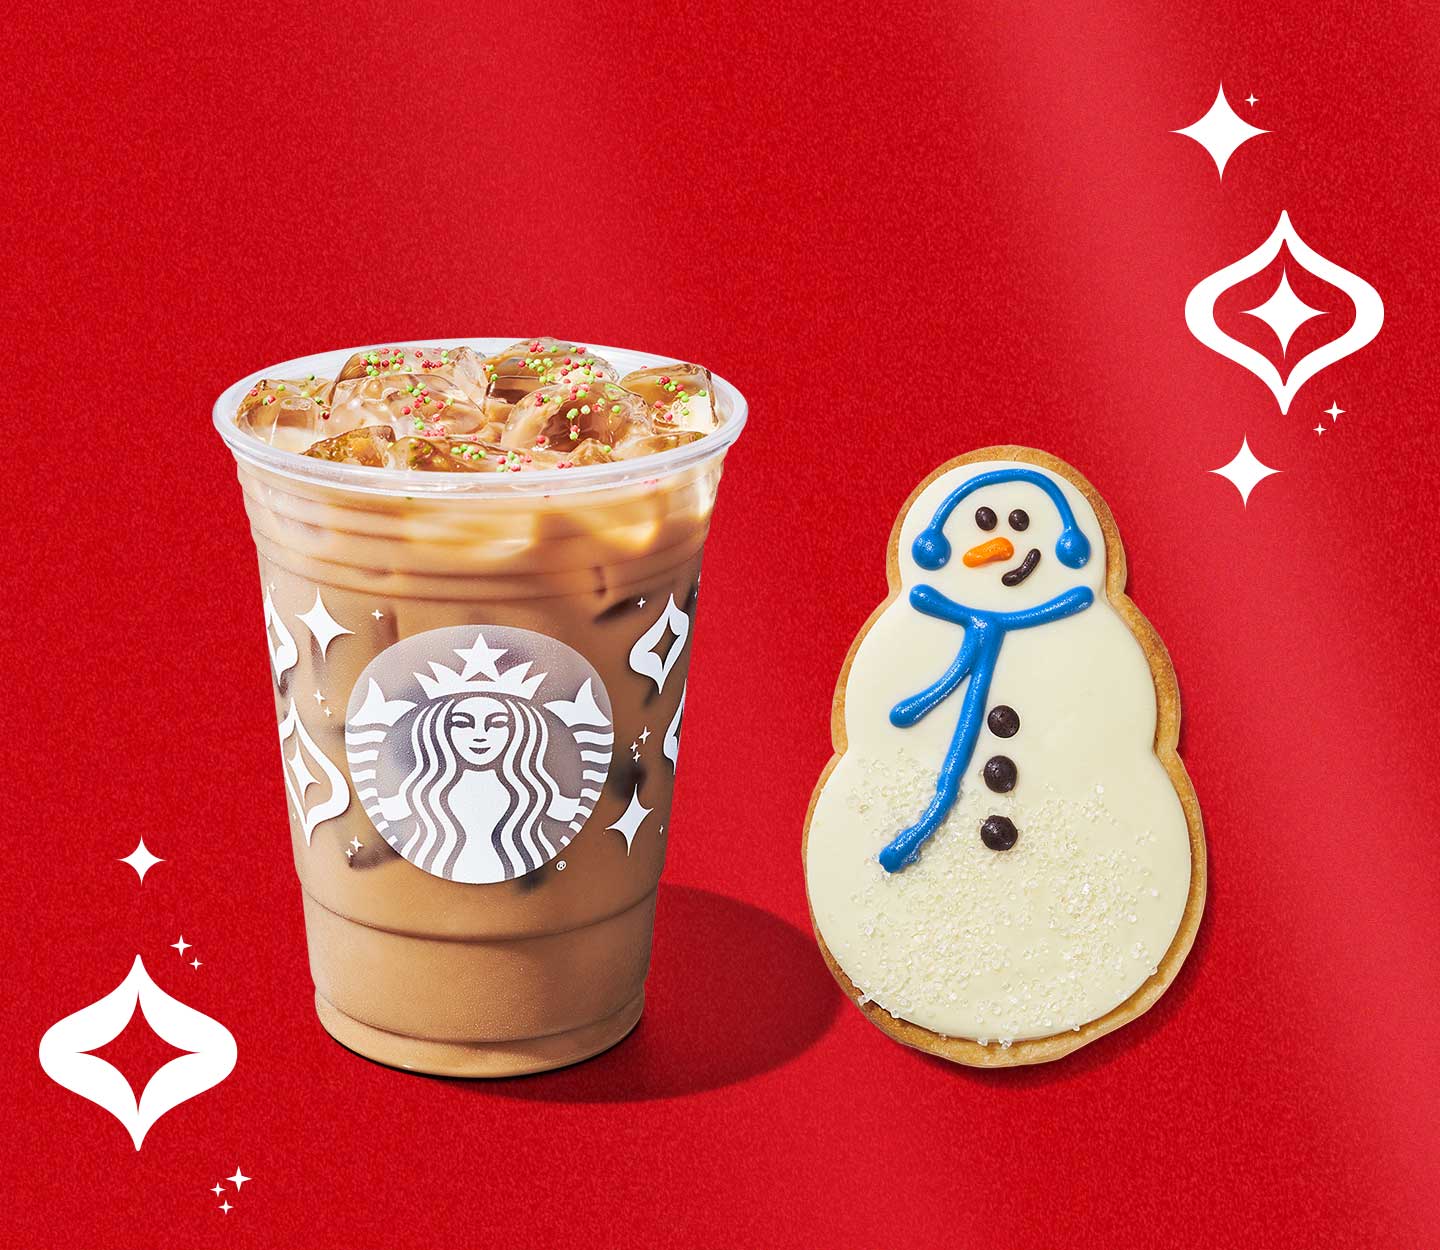 Creamy iced espresso drink and frosted snowman-shaped cookie.